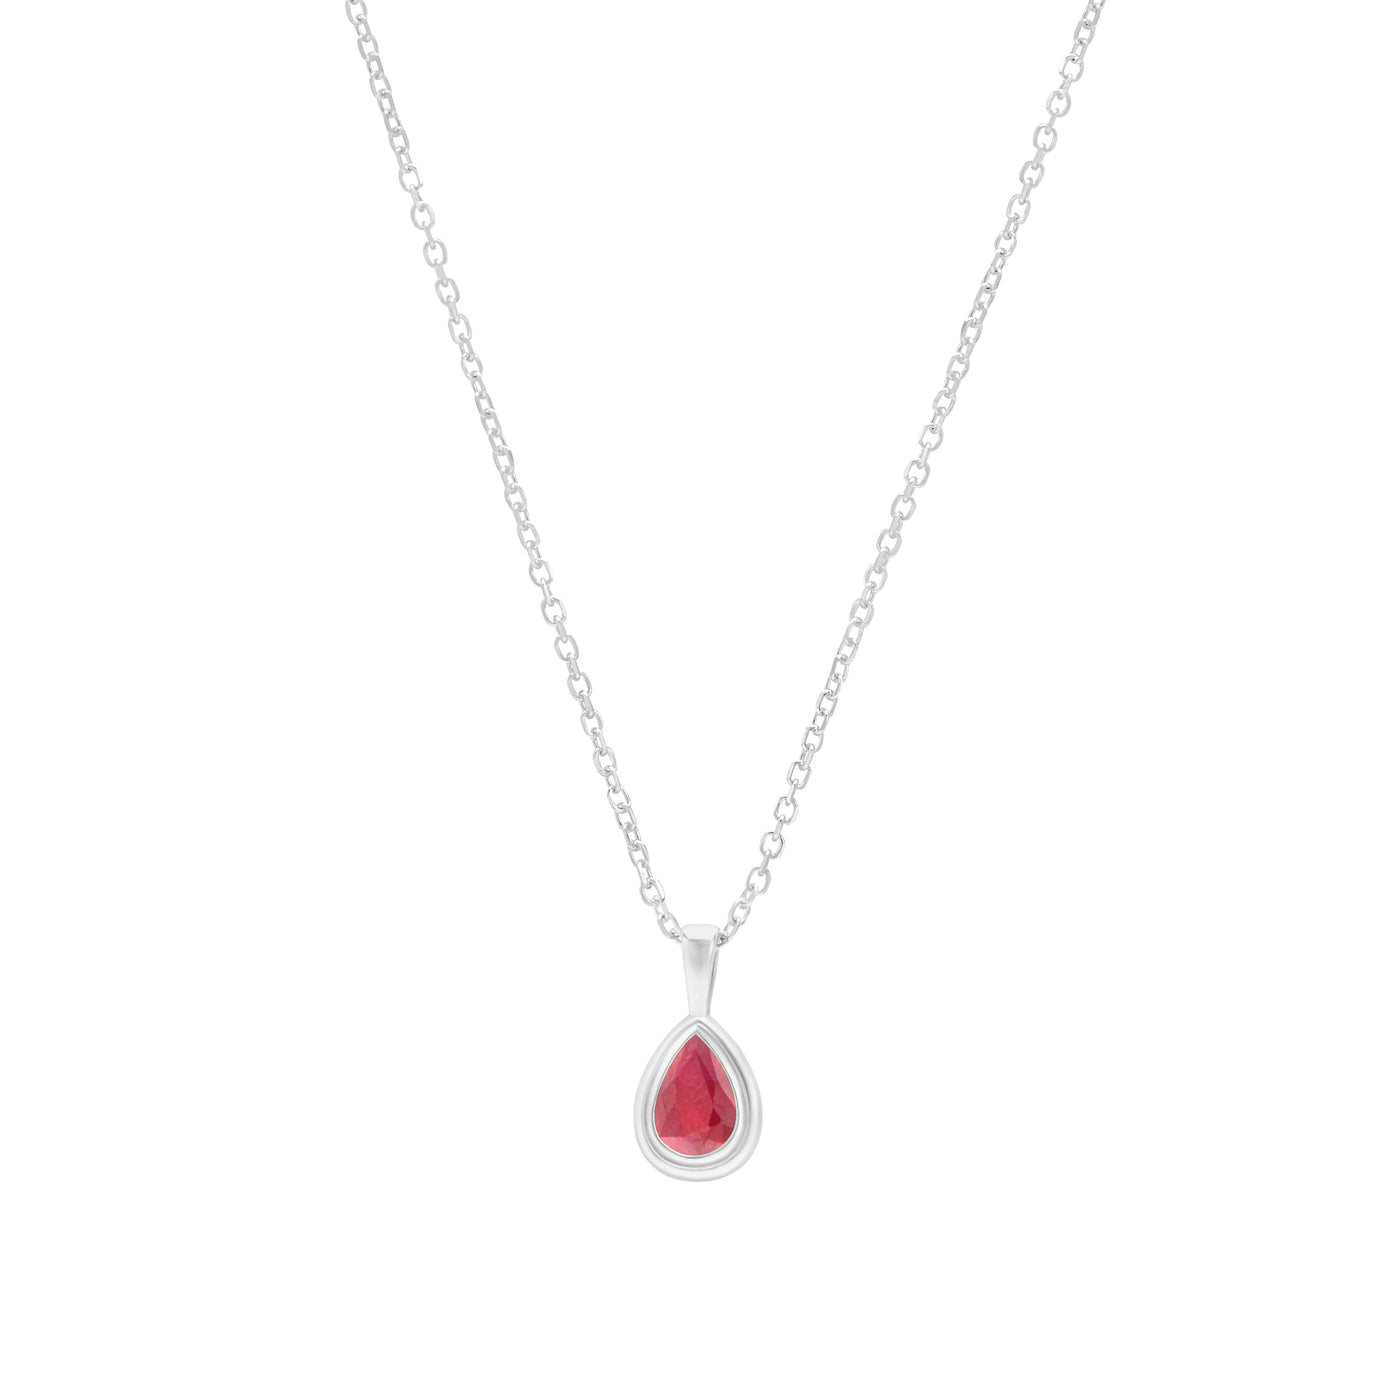 Ruby pear shaped pendant in white gold on cable chain on white background